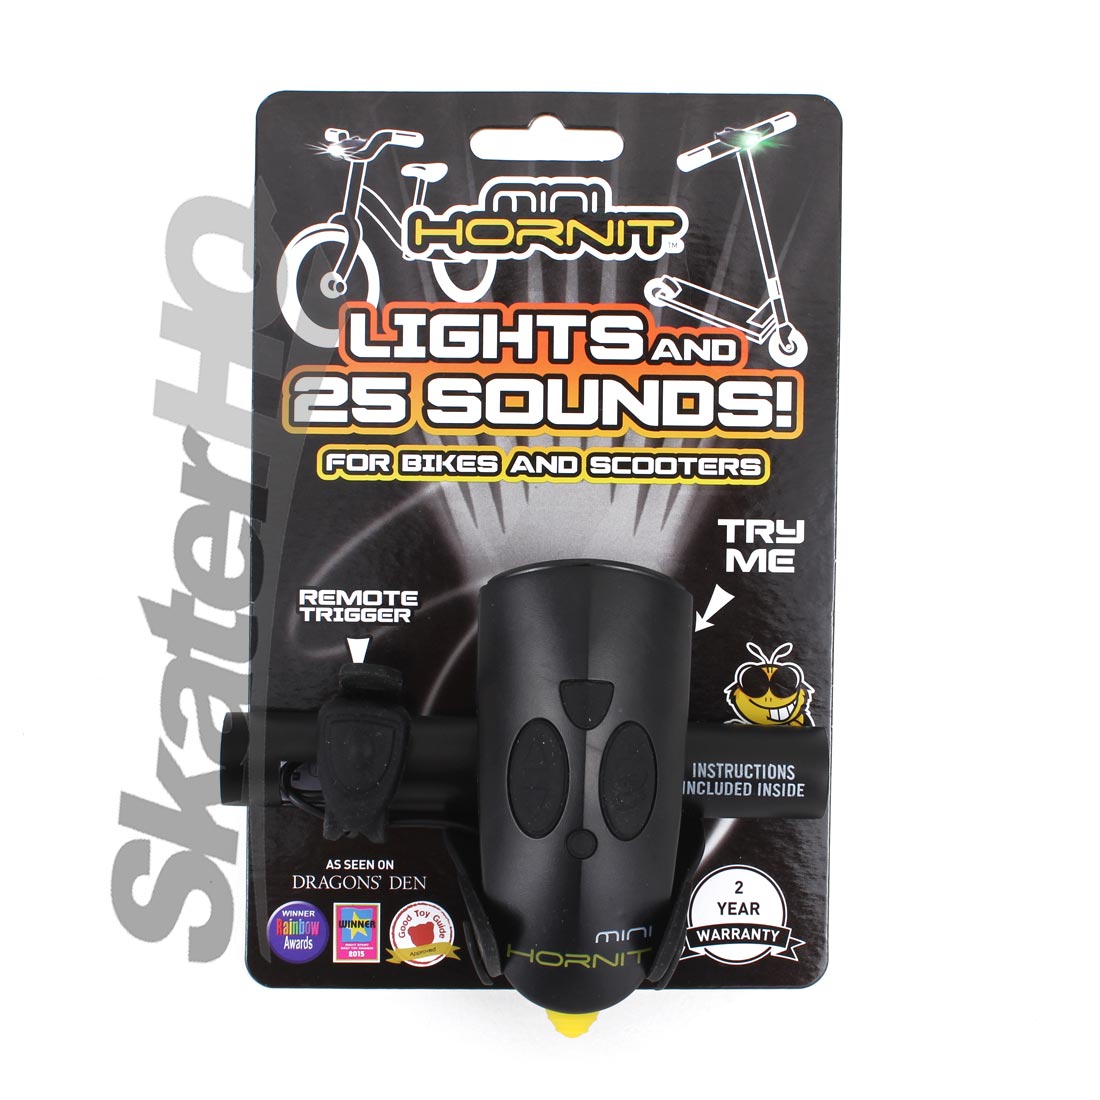 Hornit Mini Noise Maker & Light - Black/Yellow Scooter Accessories